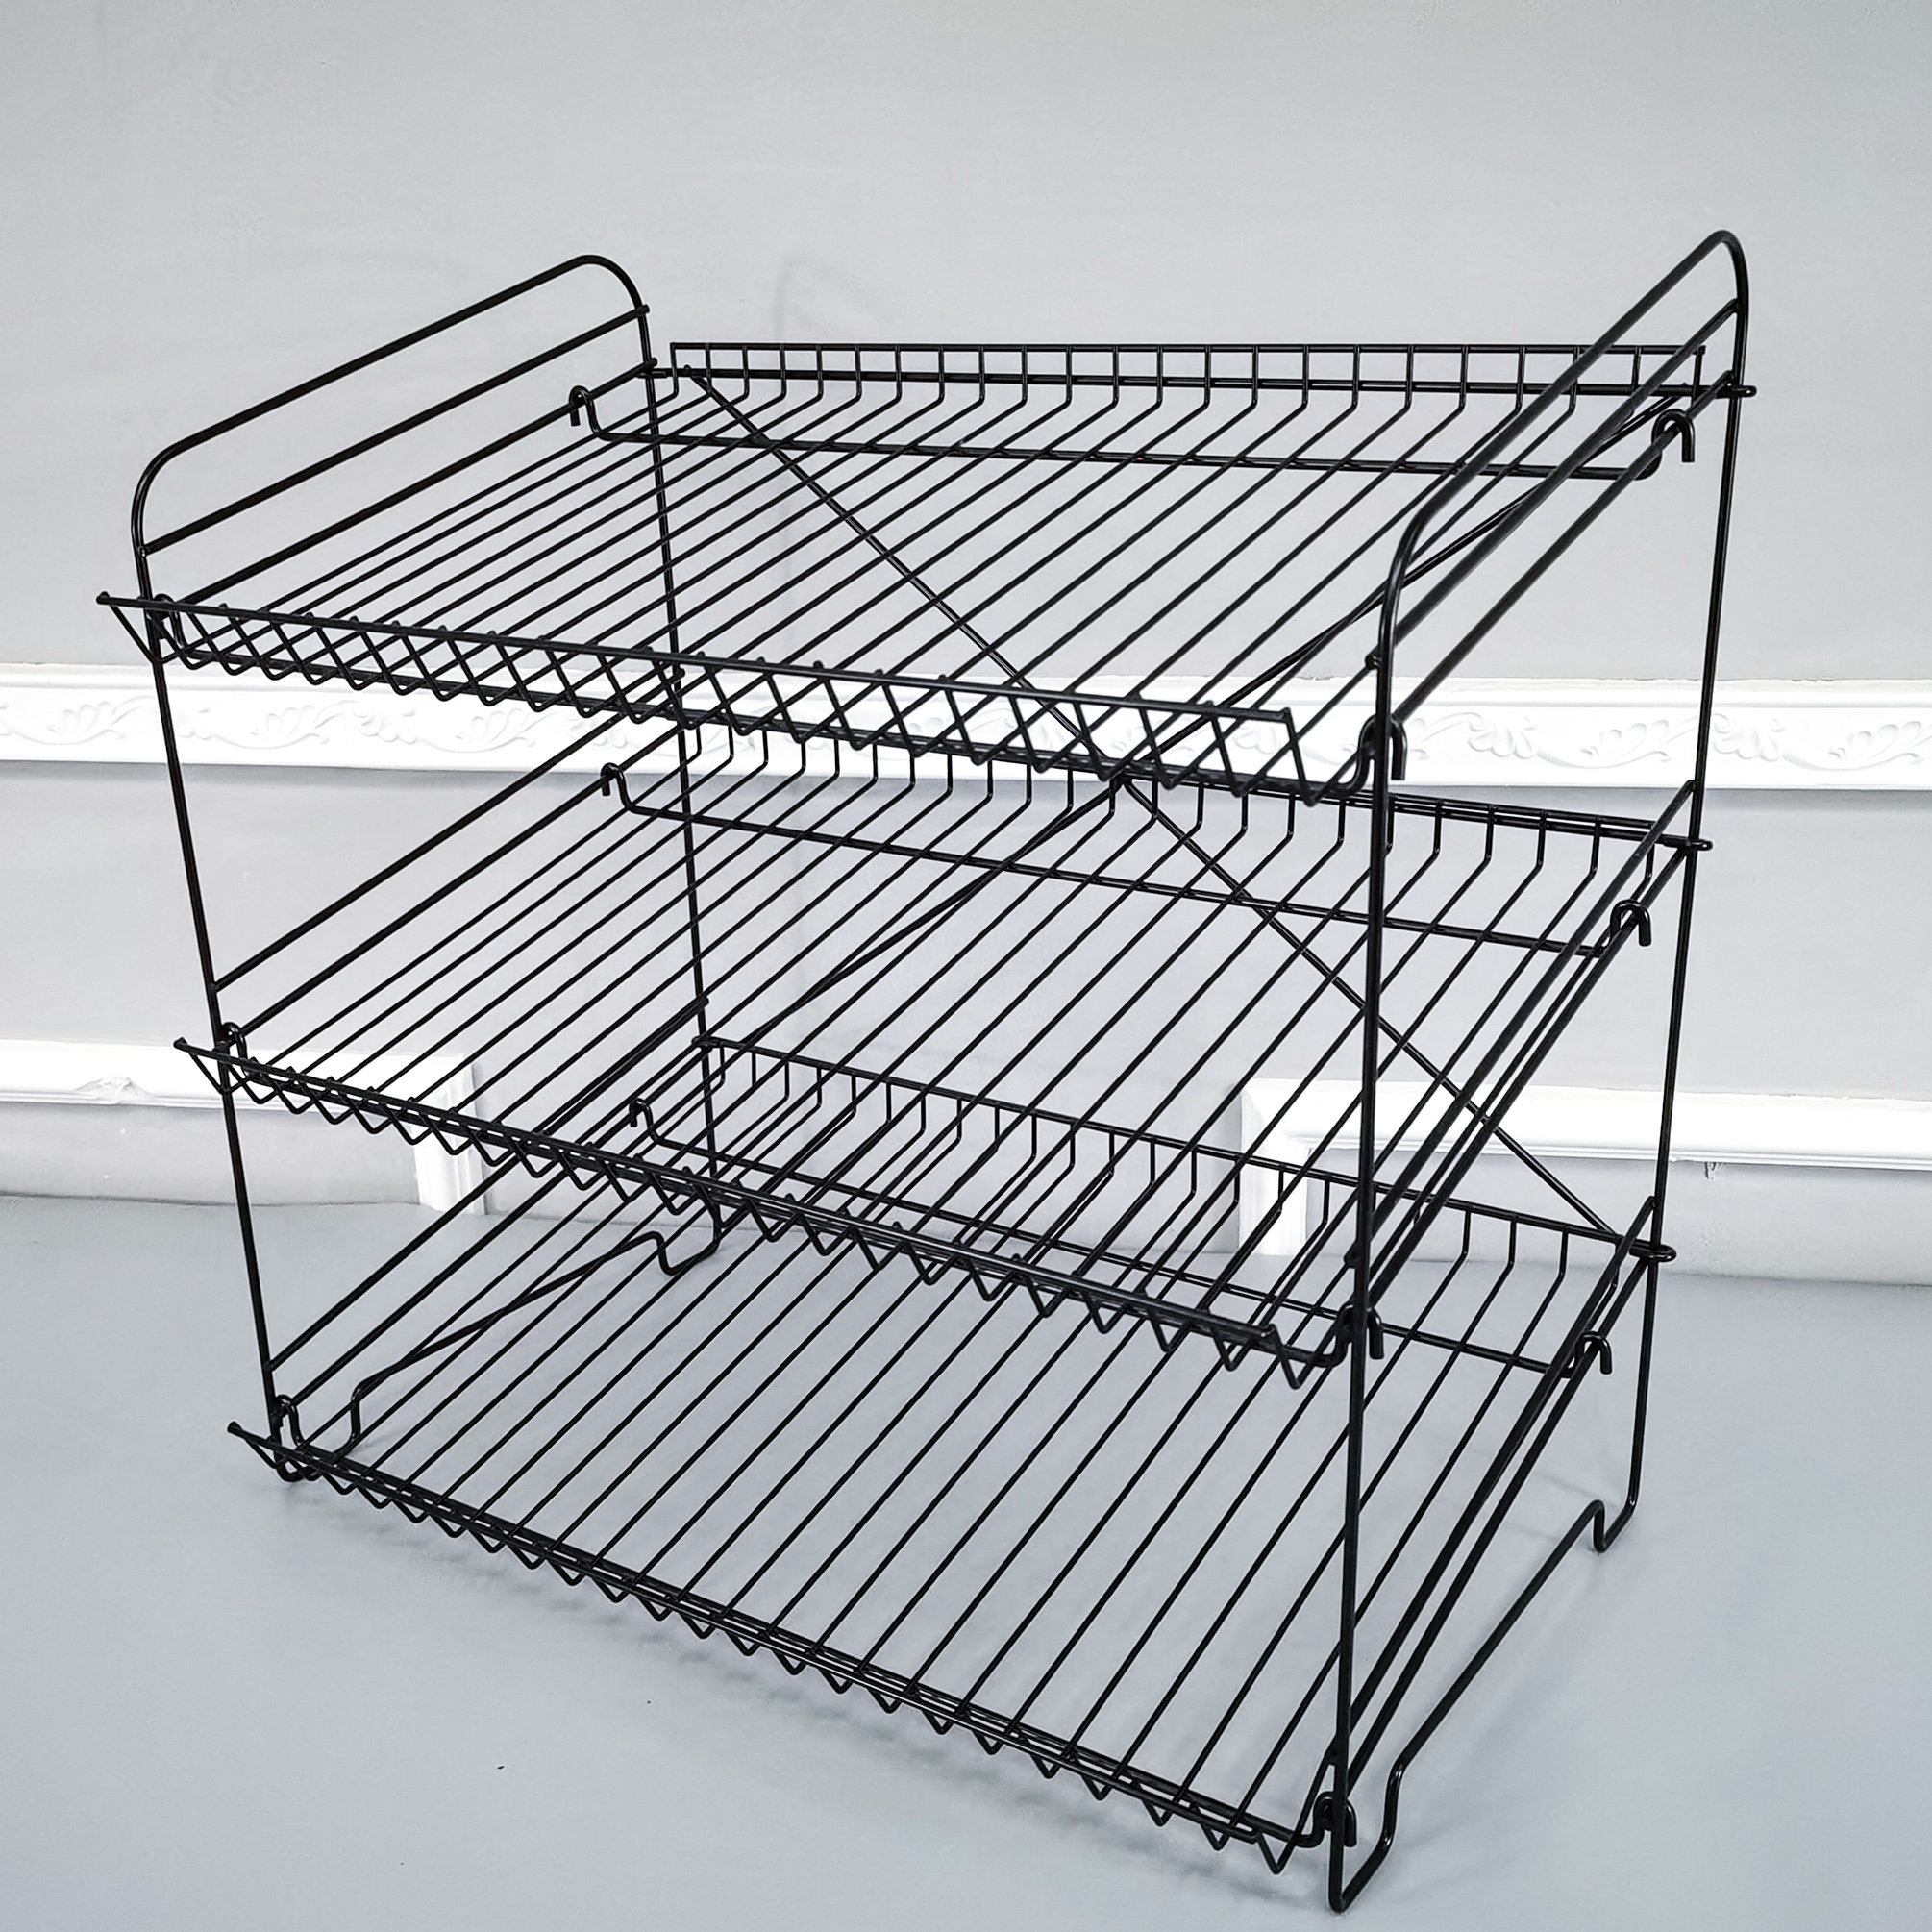 4 Tiers Retail Candy Display Rack Snack Organizer Snack Shelf For